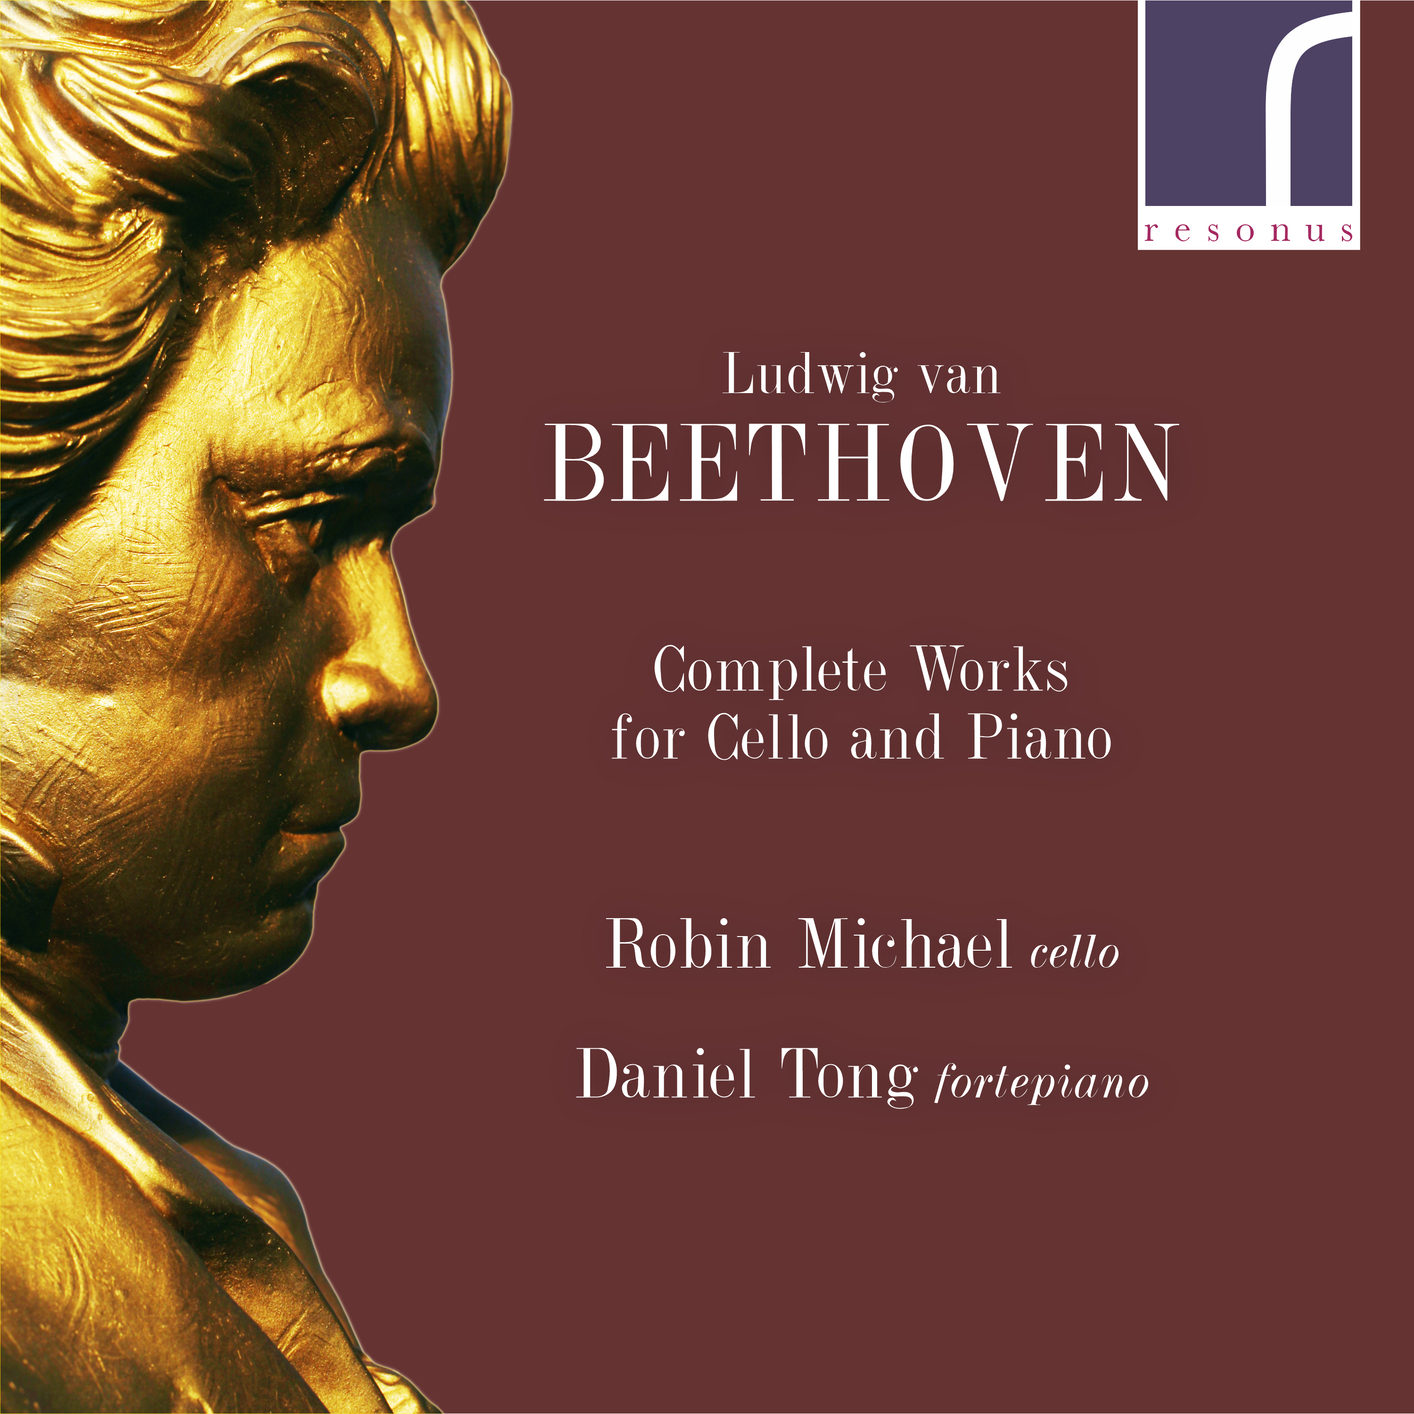 Daniel Tong & Robin Michael – Beethoven: Complete Works for Cello and Piano (2020) [FLAC 24bit/96kHz]